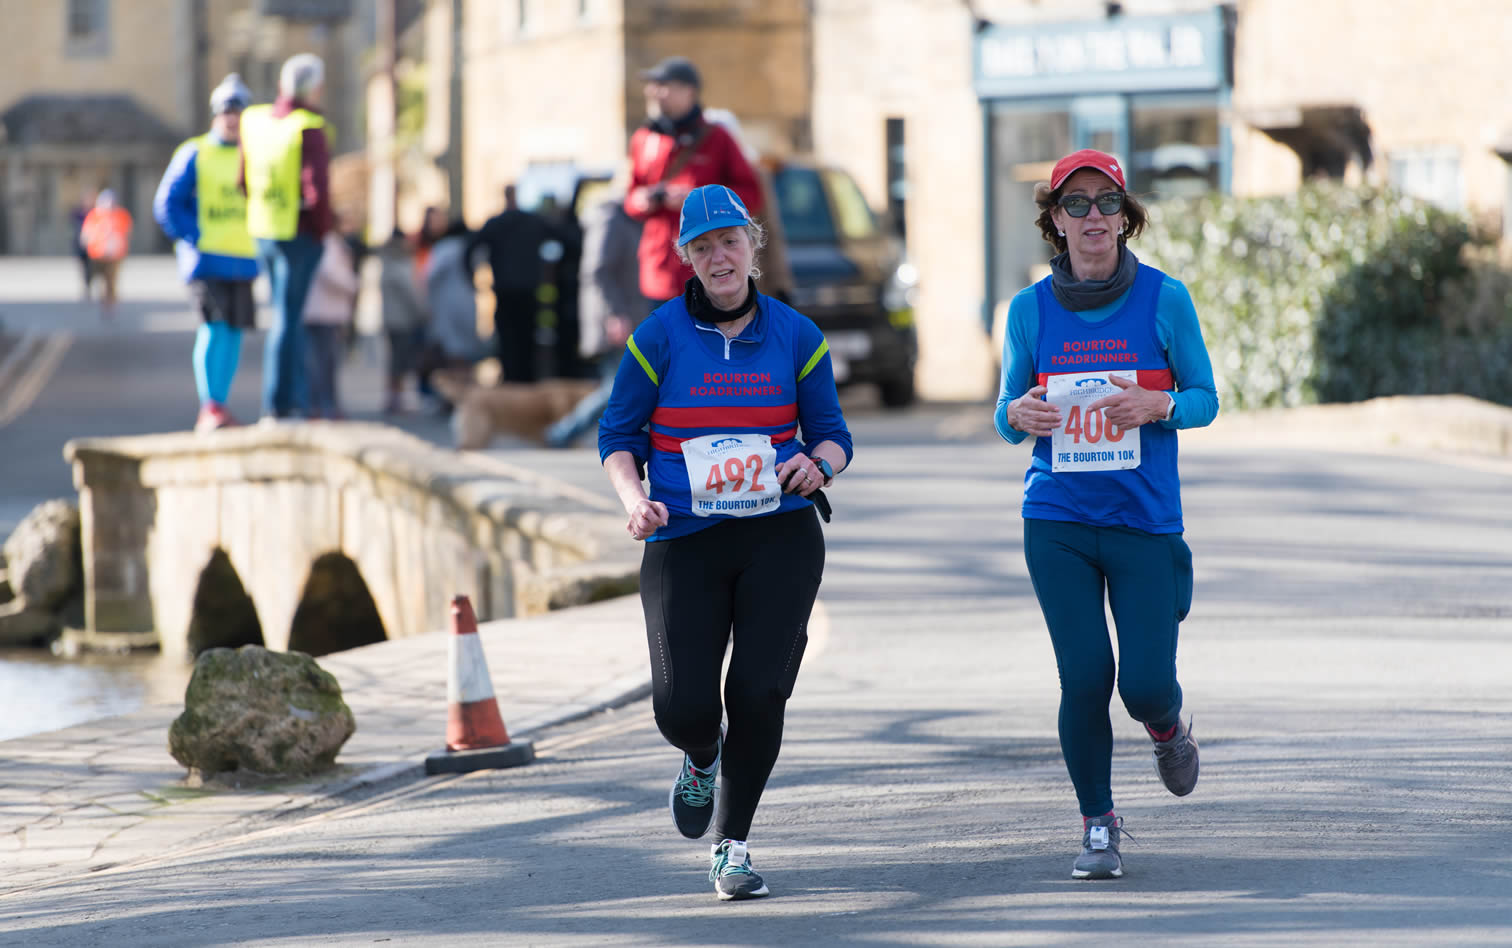 Nicky Patterson & Chris Lynch at Bourton 10k - 27th February 2022